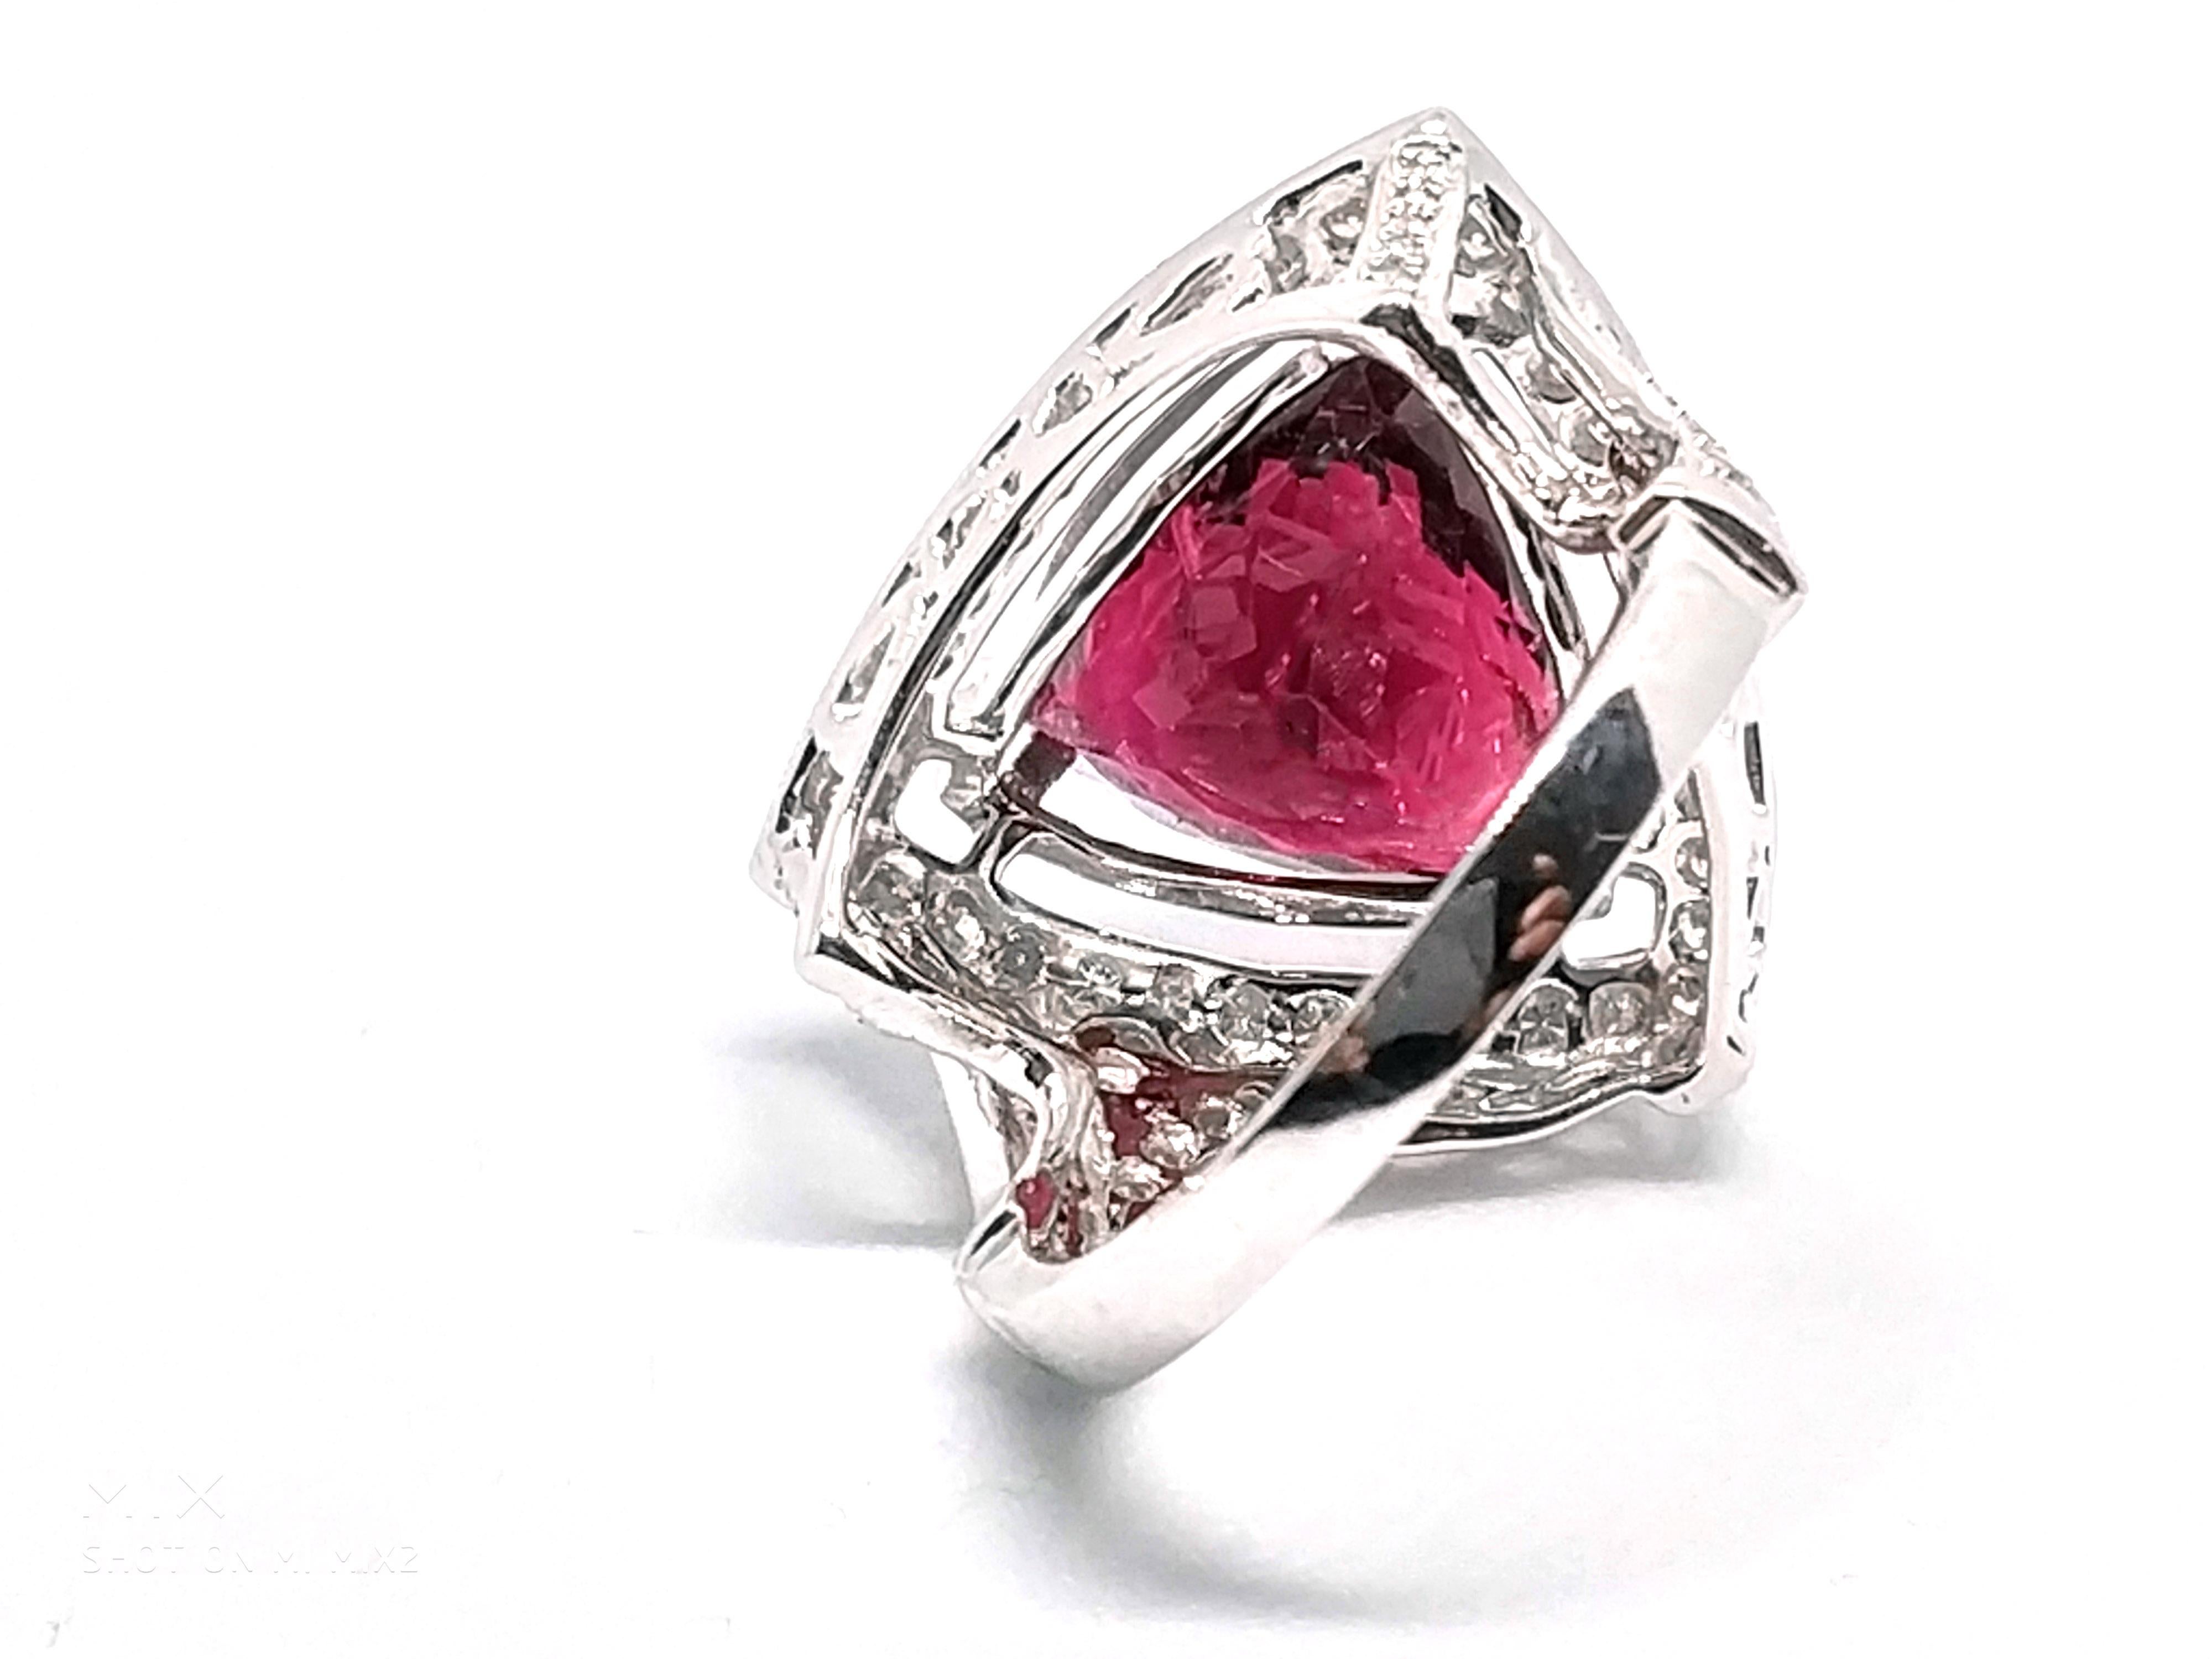 8.31 Carat Natural Rubellite Pink Tourmaline and 1.6 Carat Diamond Ring In New Condition For Sale In London, GB